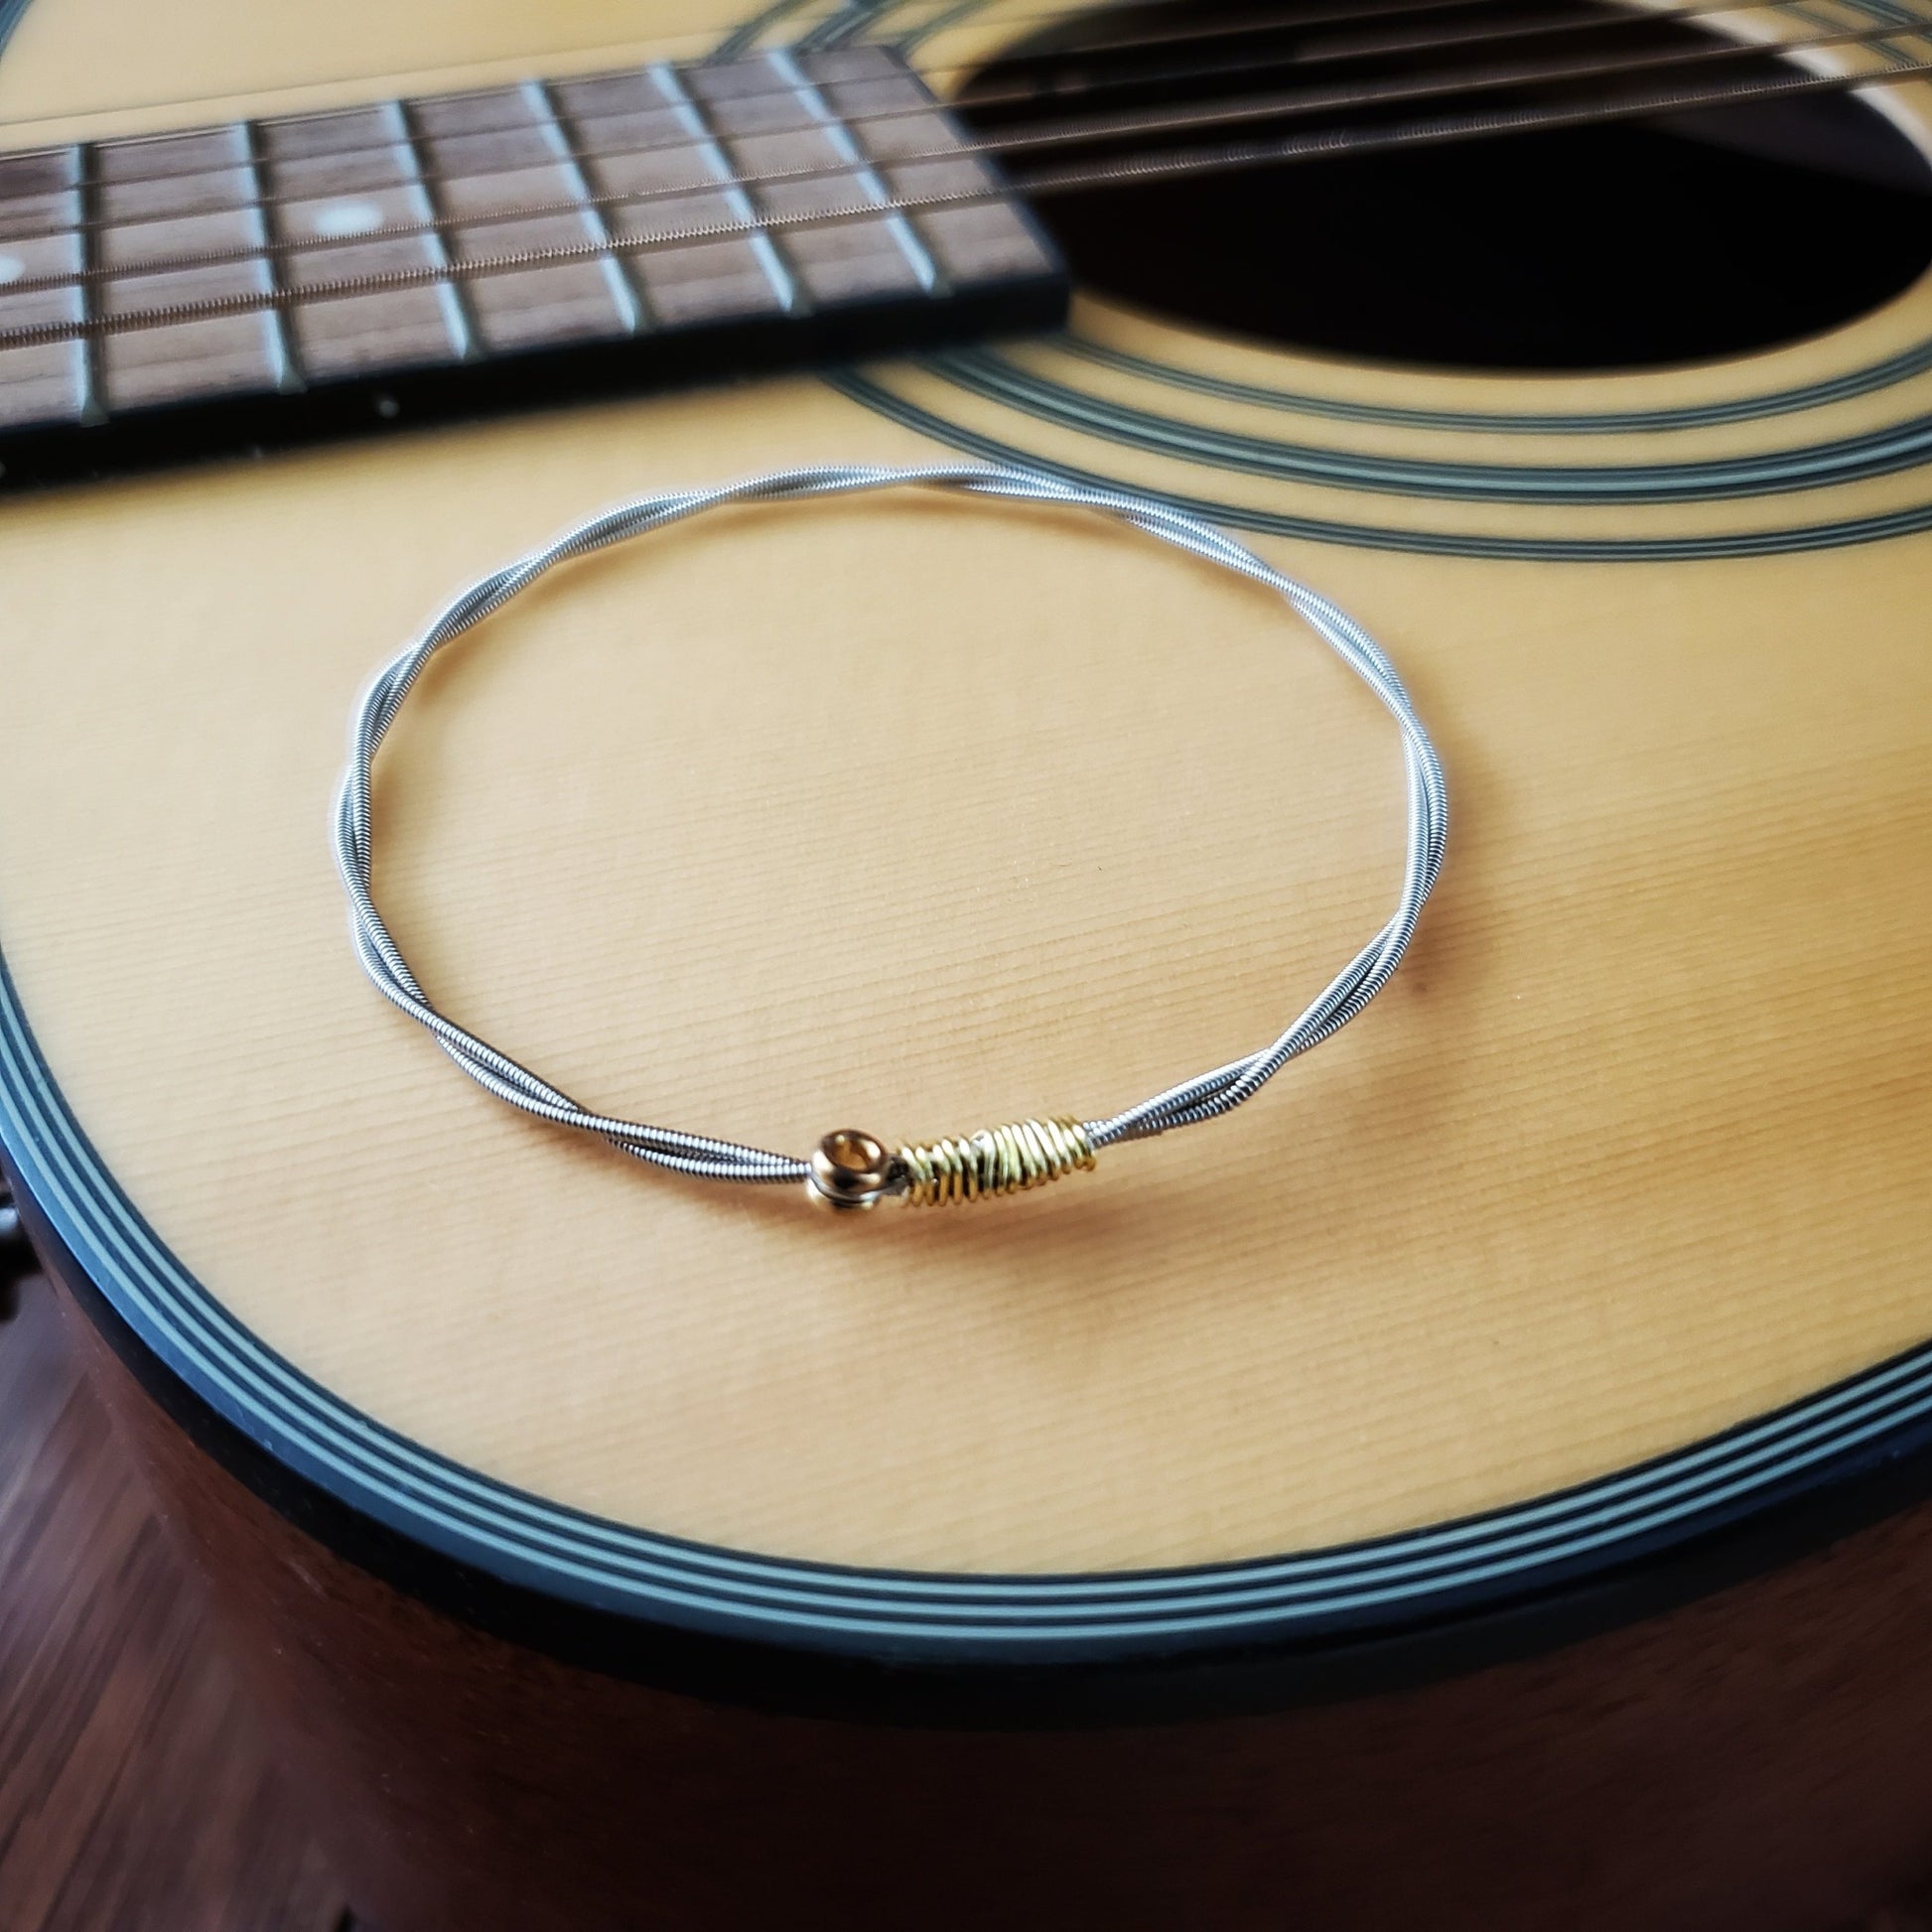 bangle style bracelet made from an upcycled guitar string is sitting on a tan coloured guitar